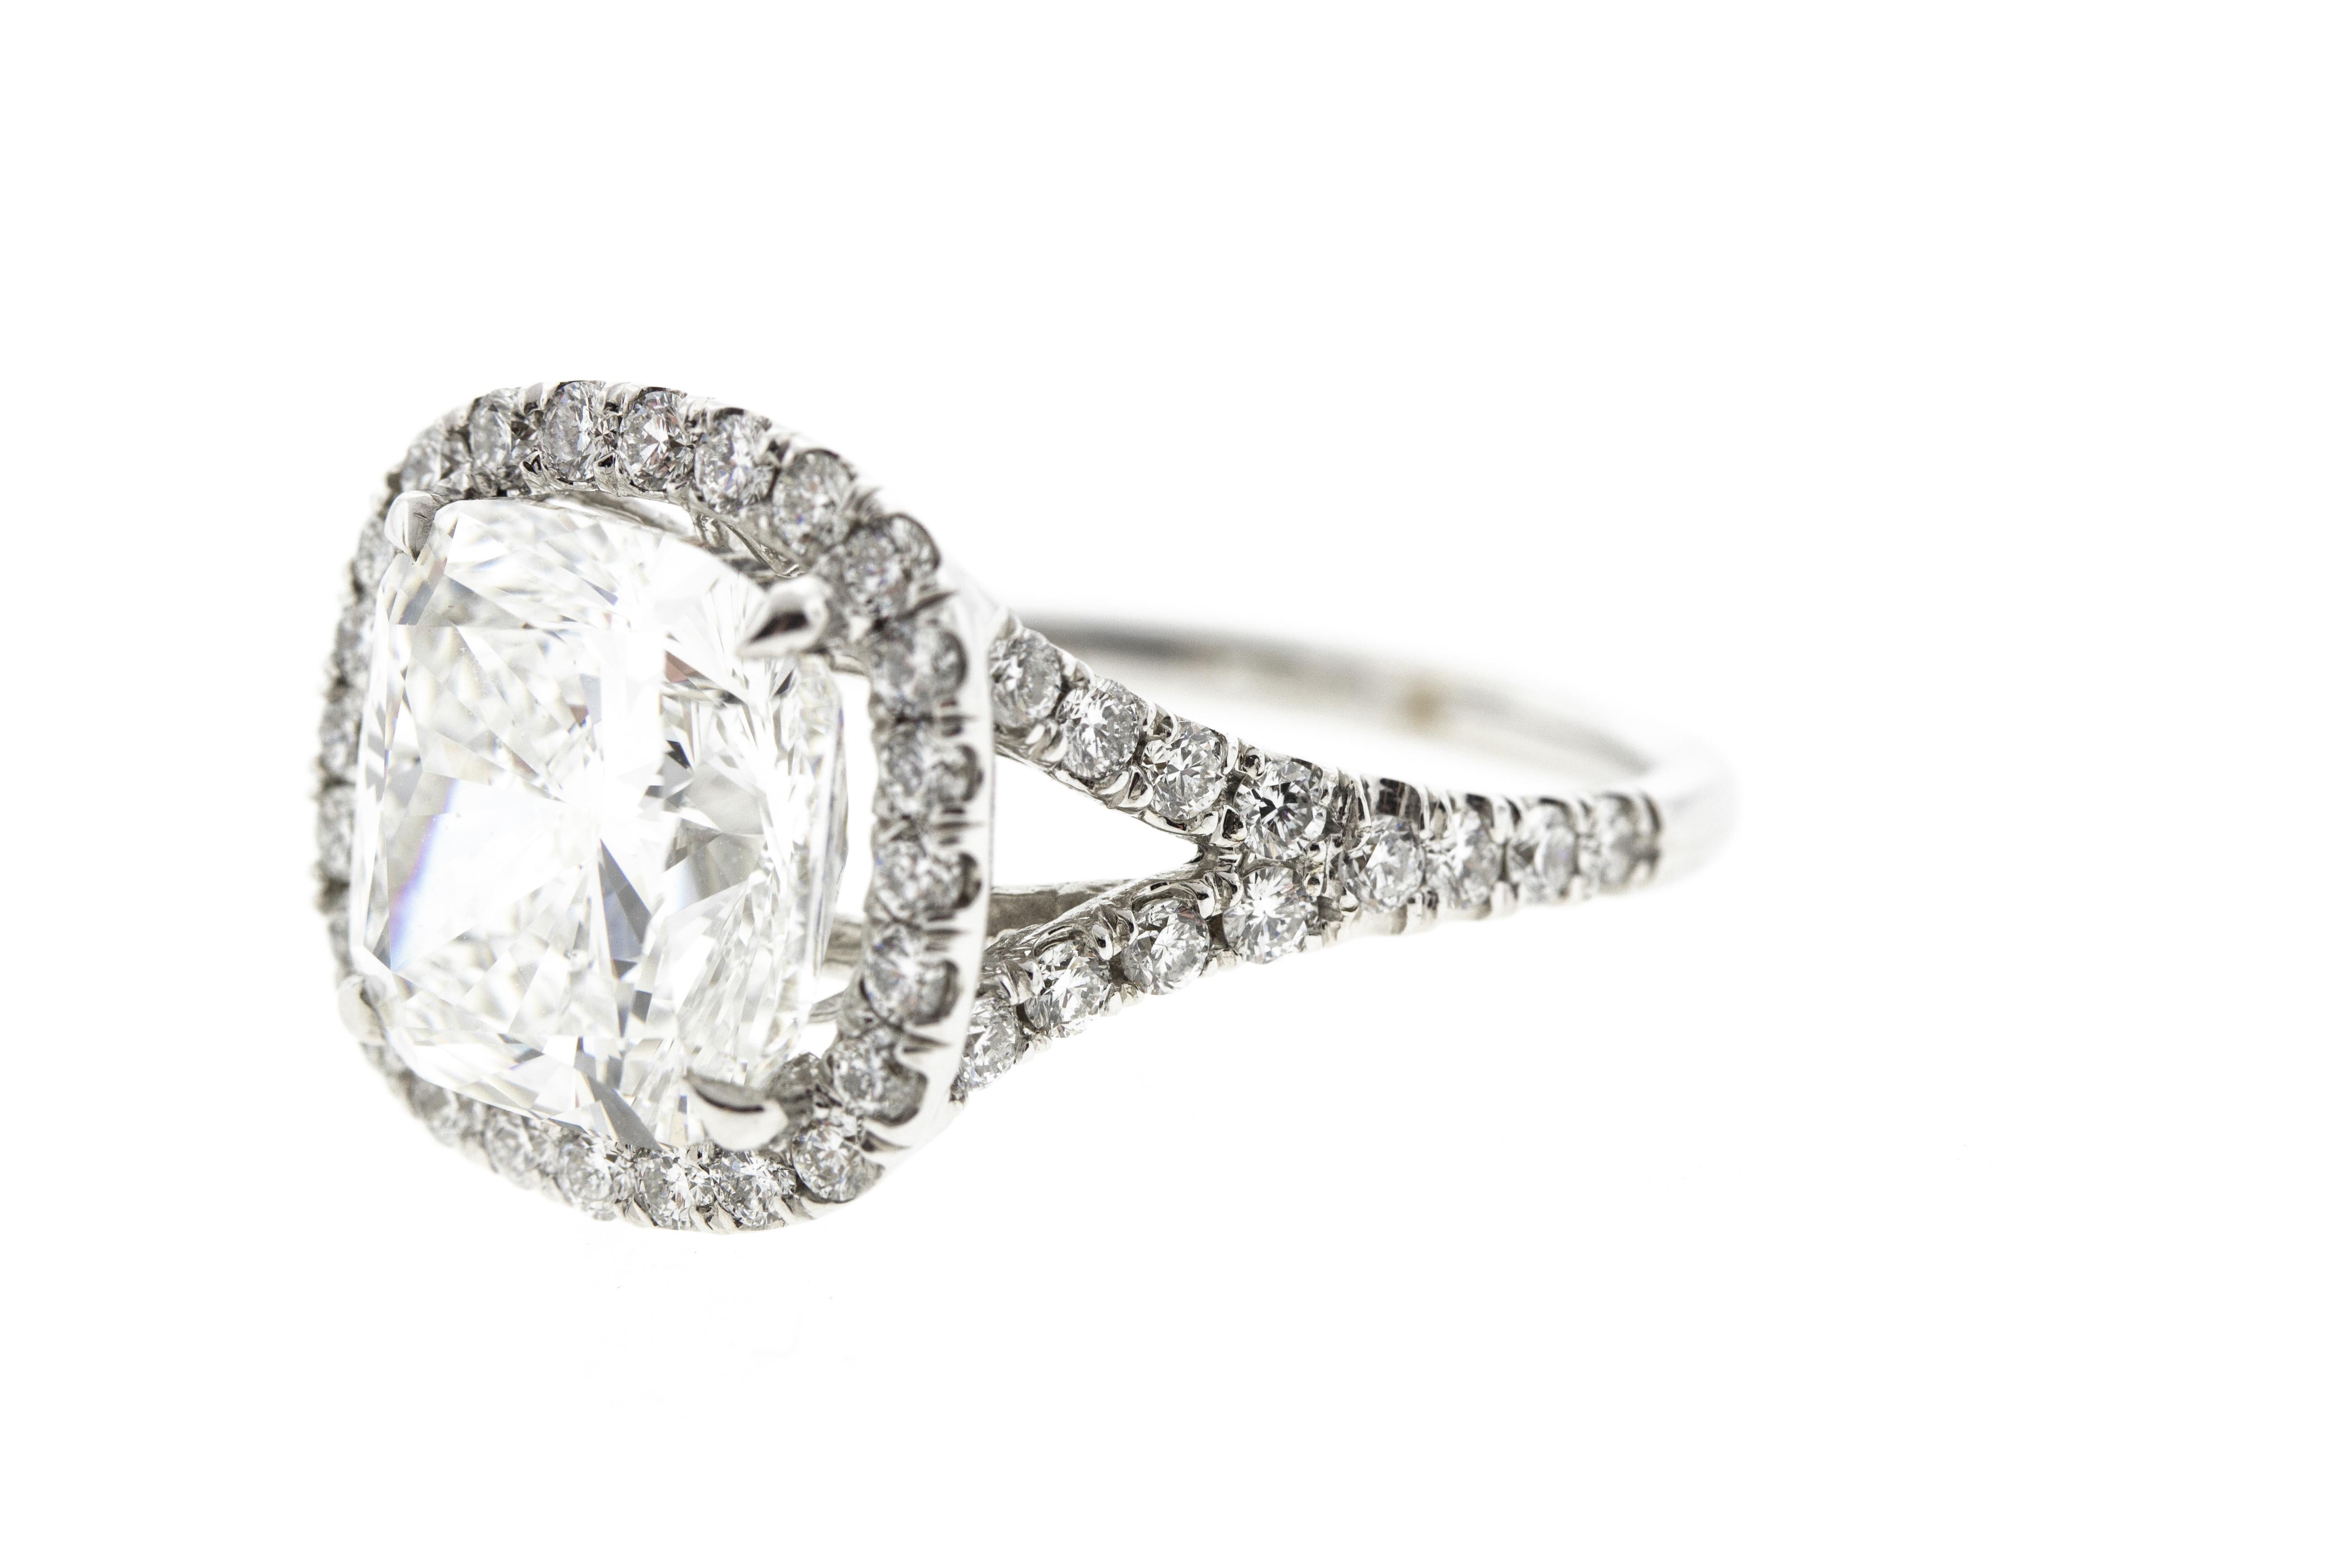 This cushion diamond halo engagement ring features a 1.74 F SI1 GIA certified cushion center diamond and is surrounded by a diamond halo and diamonds on the shank for a total carat weight of 2.31 in a 14K white gold setting. 